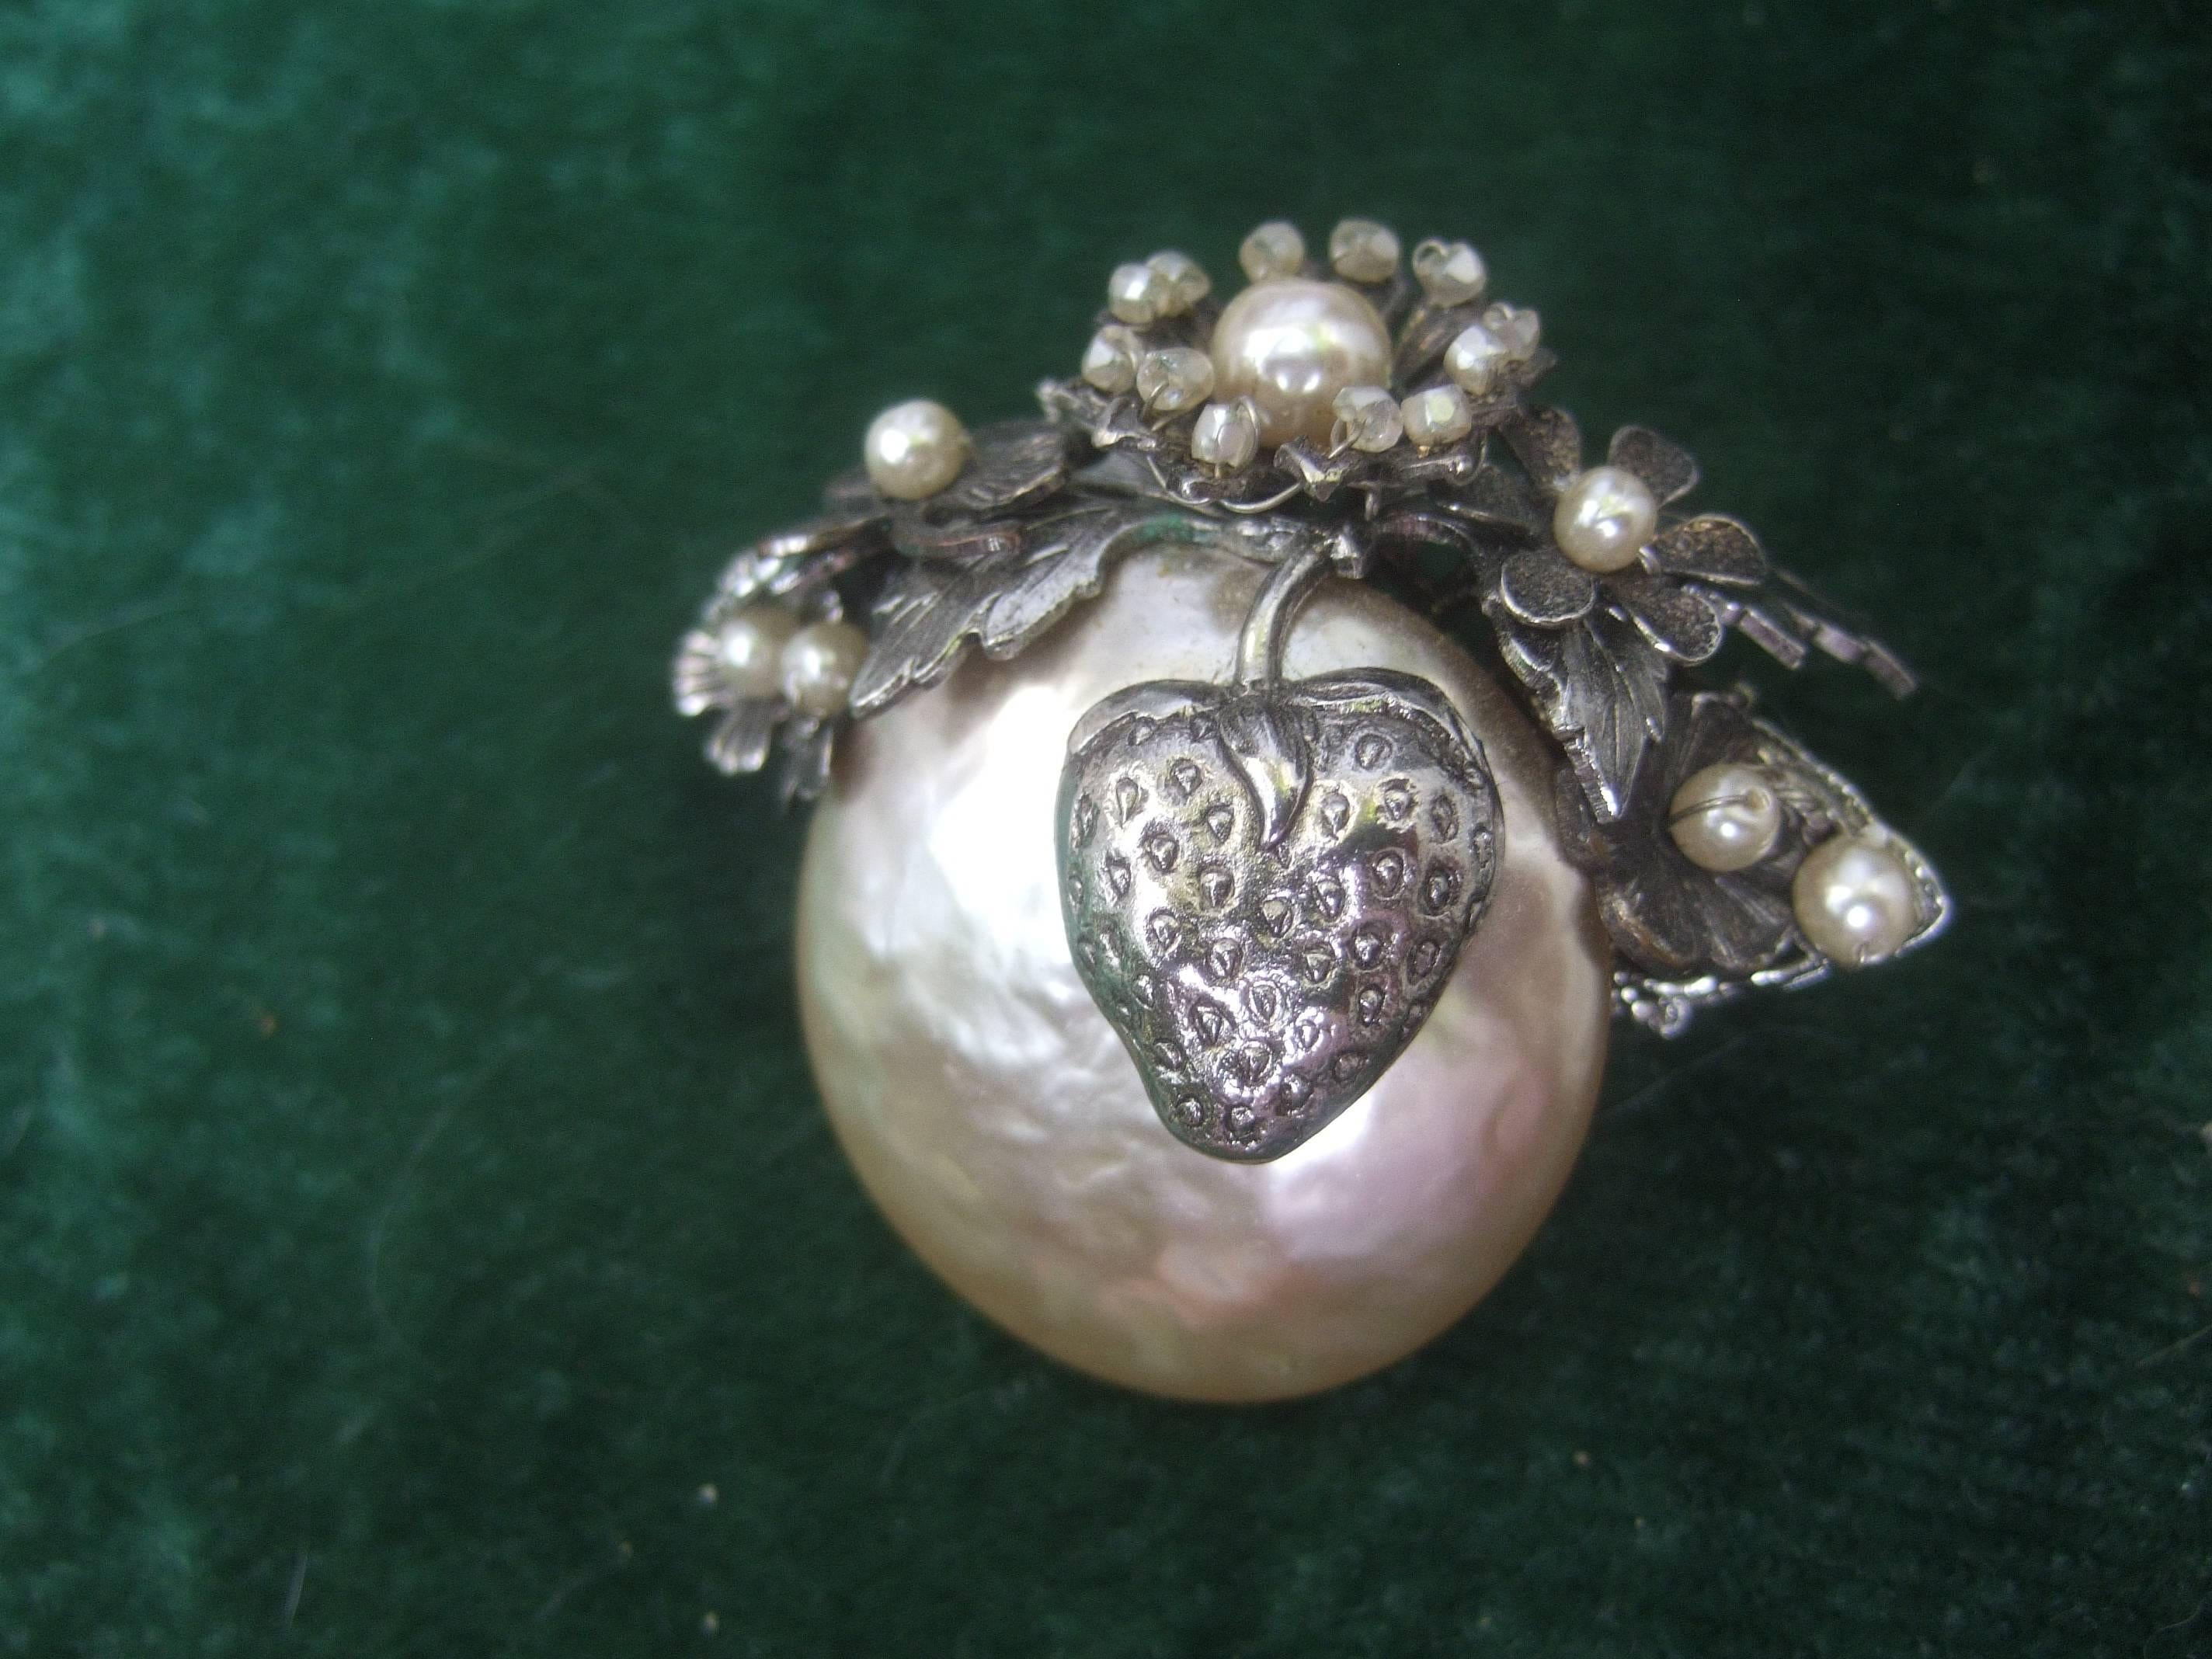 Miriam Haskell Elegant baroque glass pearl brooch ca 1950
The large glass baroque style pearl is adorned with
a silver metal tone strawberry

Designed with intricate silver metal etched leaves
with floral pedals encrusted with tint glass